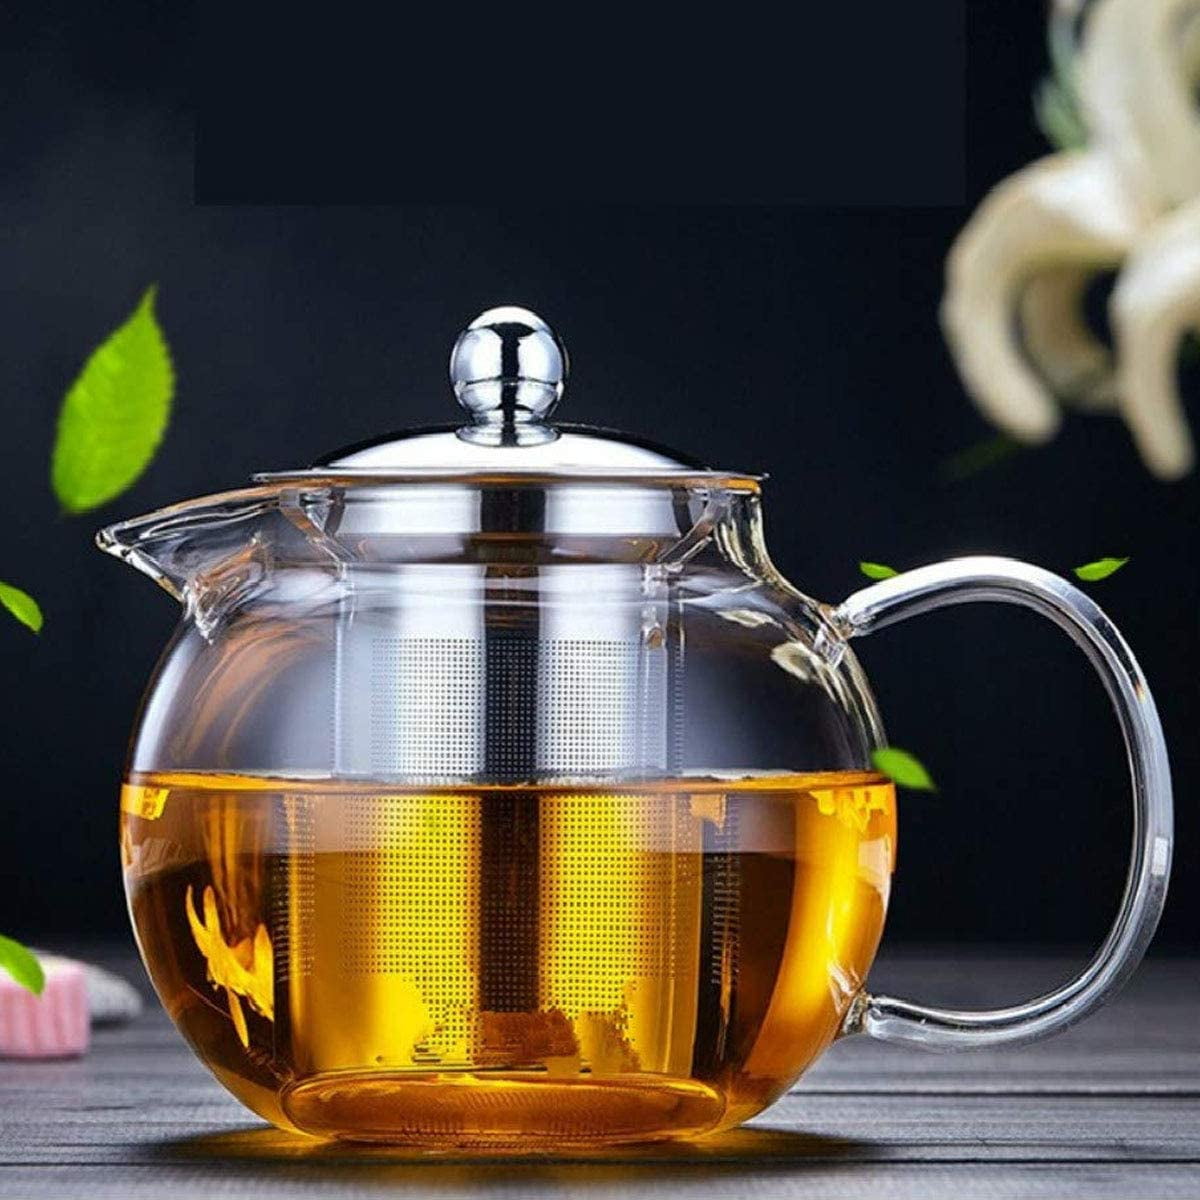 Stovetop Safe Clear Glass Teapot Tea Set with Removable Infuser,Includes 4 Small Ceramic Tea Cups and Saucers 1 Ceramic Warmer Base,Glass Tea Kettle with Strainer Blooming Loose Leaf Tea Pot 